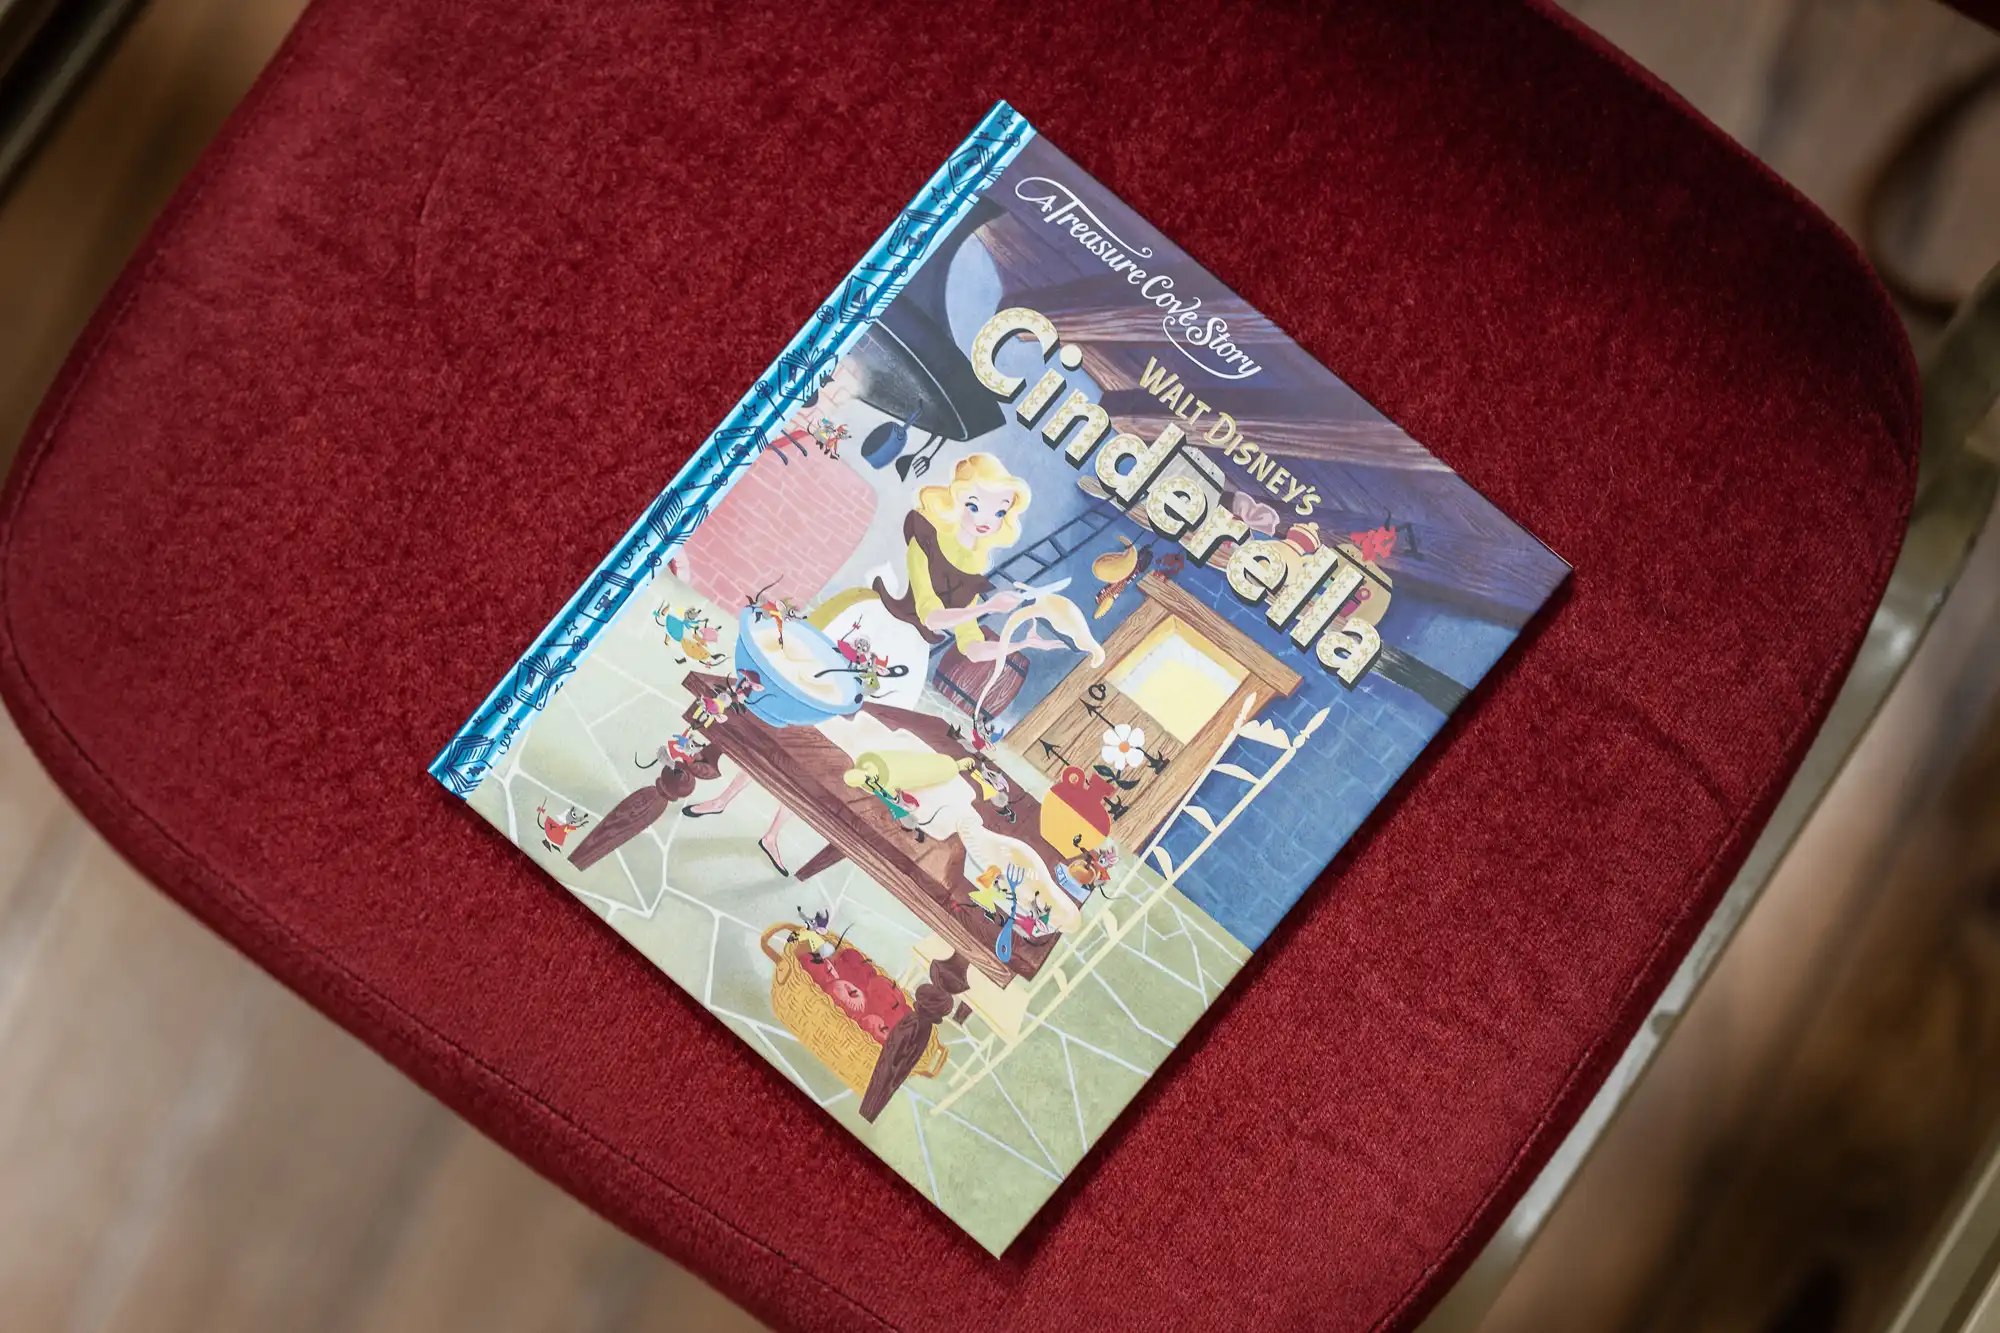 A children's book titled "Walt Disney's Cinderella" with colorful illustrations is placed on a red cushioned surface.